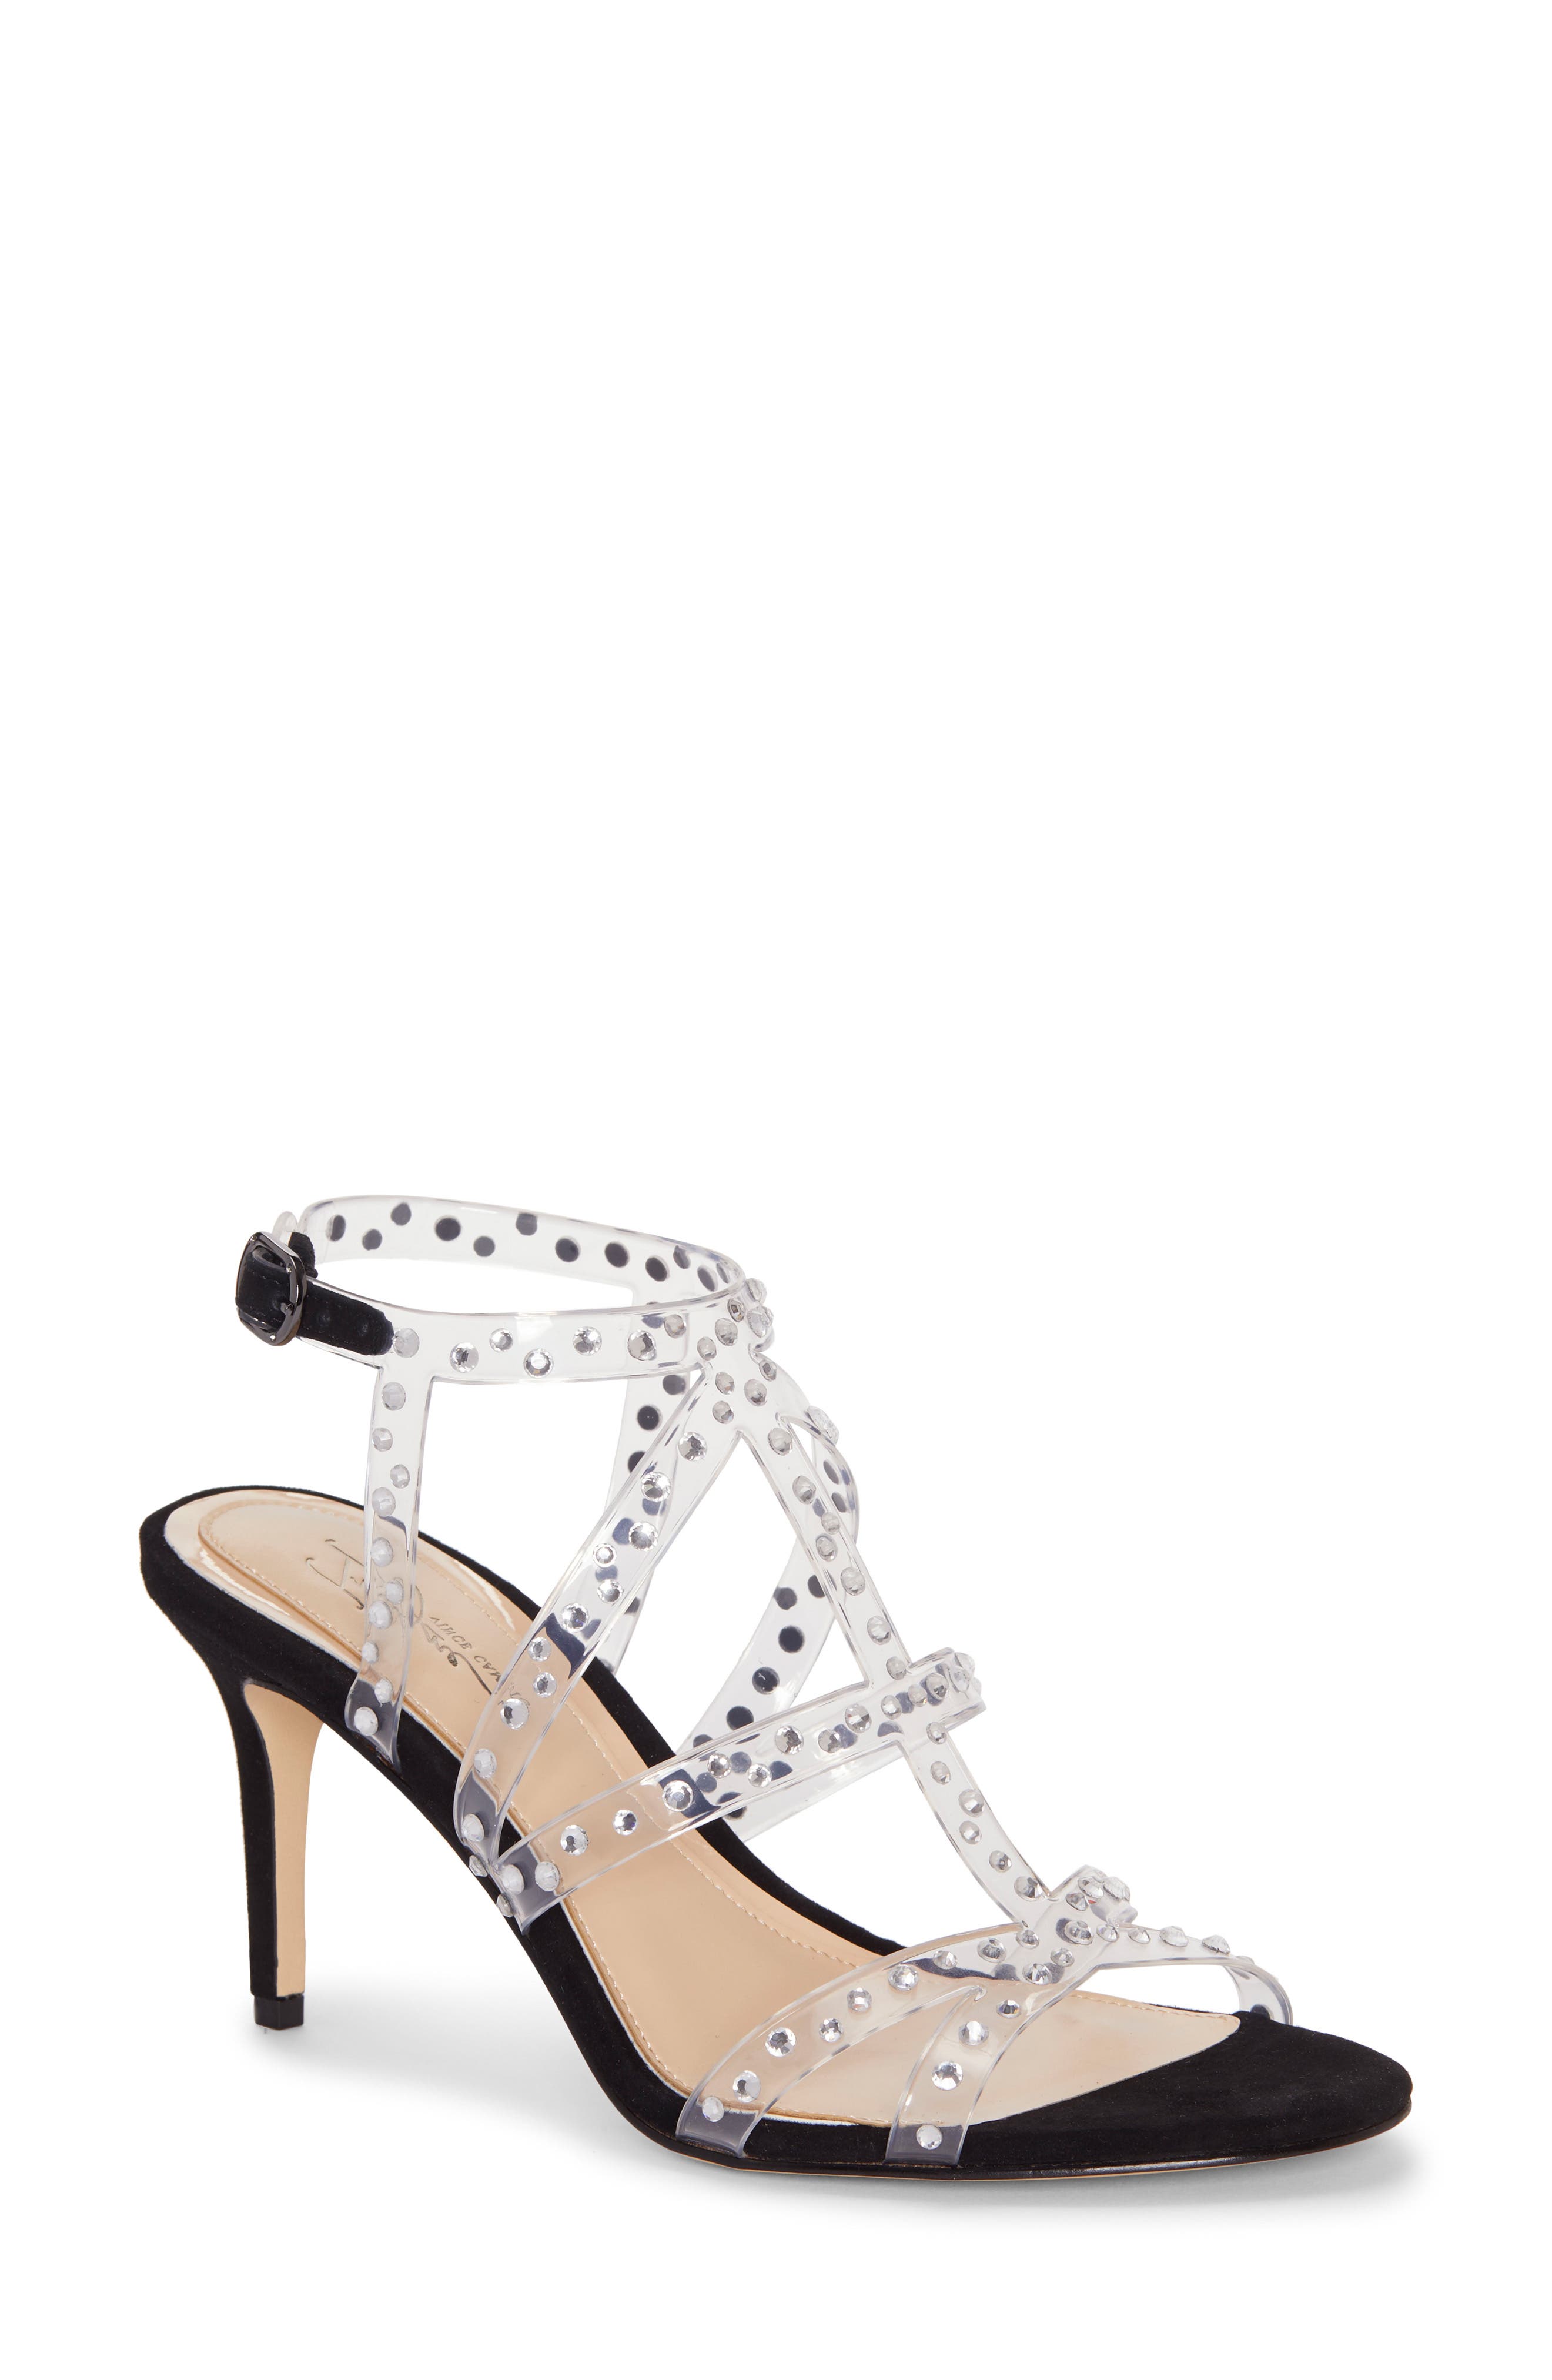 imagine shoes by vince camuto